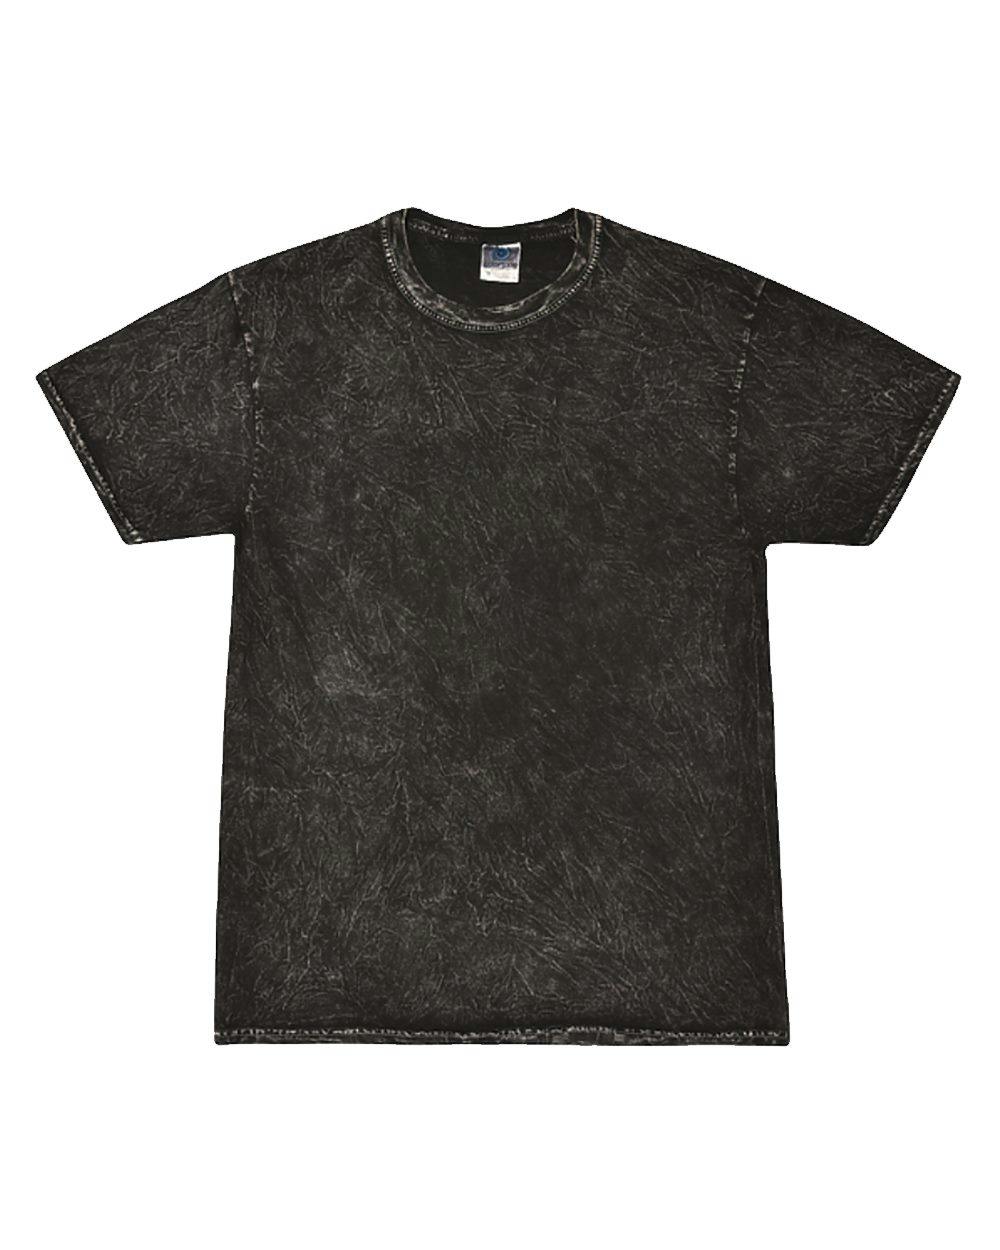 Image for Mineral Wash T-Shirt - 1300